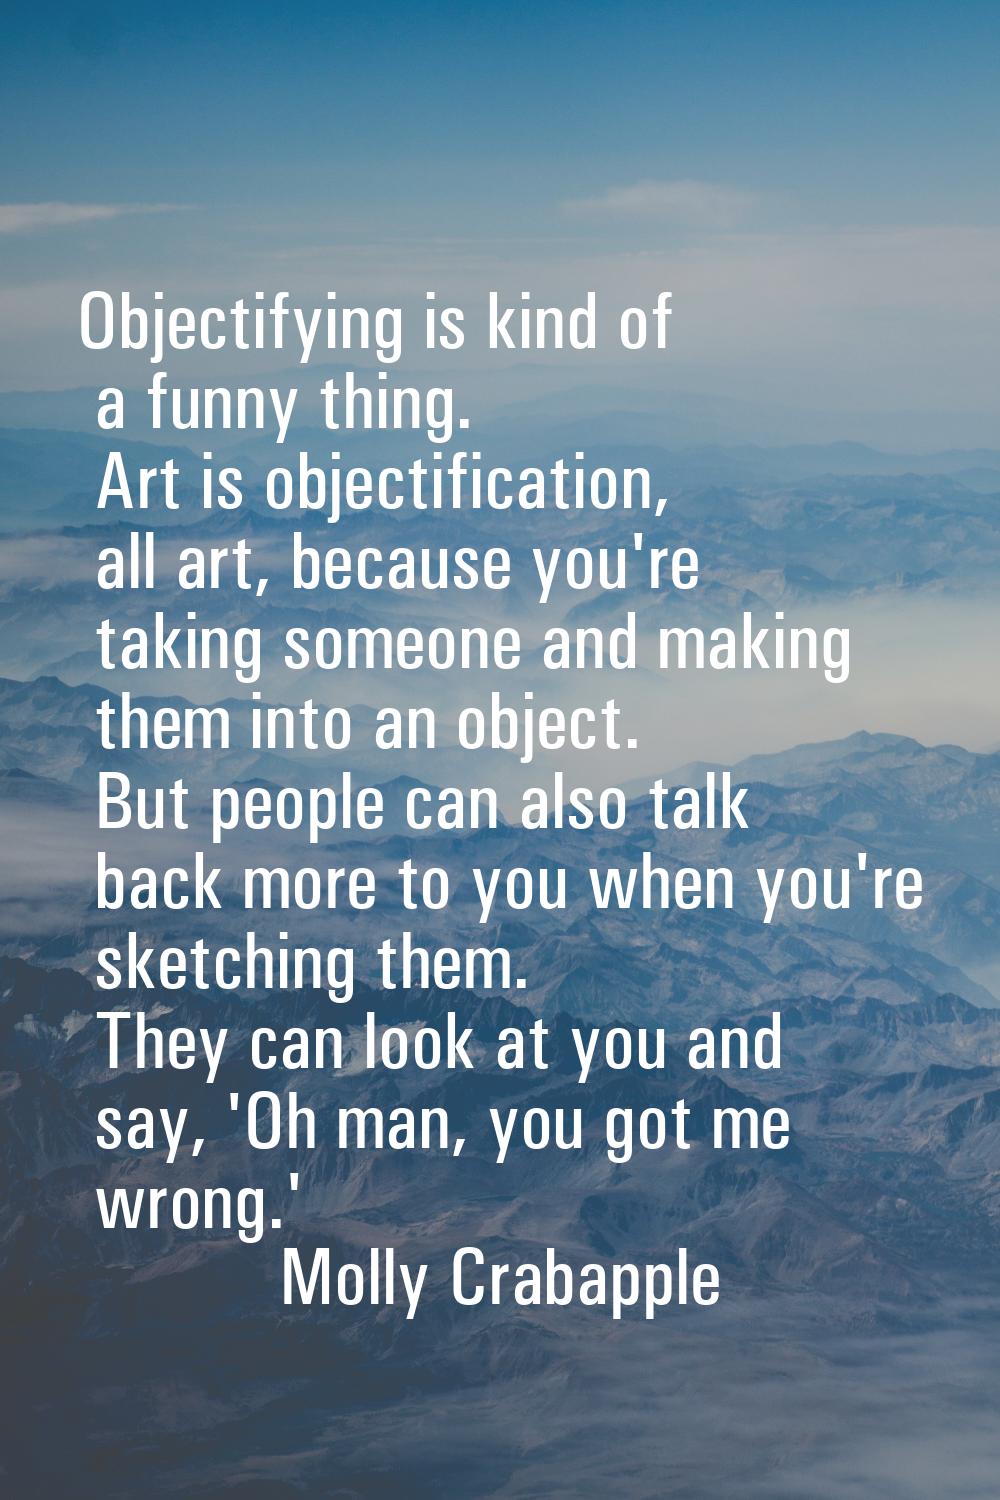 Objectifying is kind of a funny thing. Art is objectification, all art, because you're taking someo